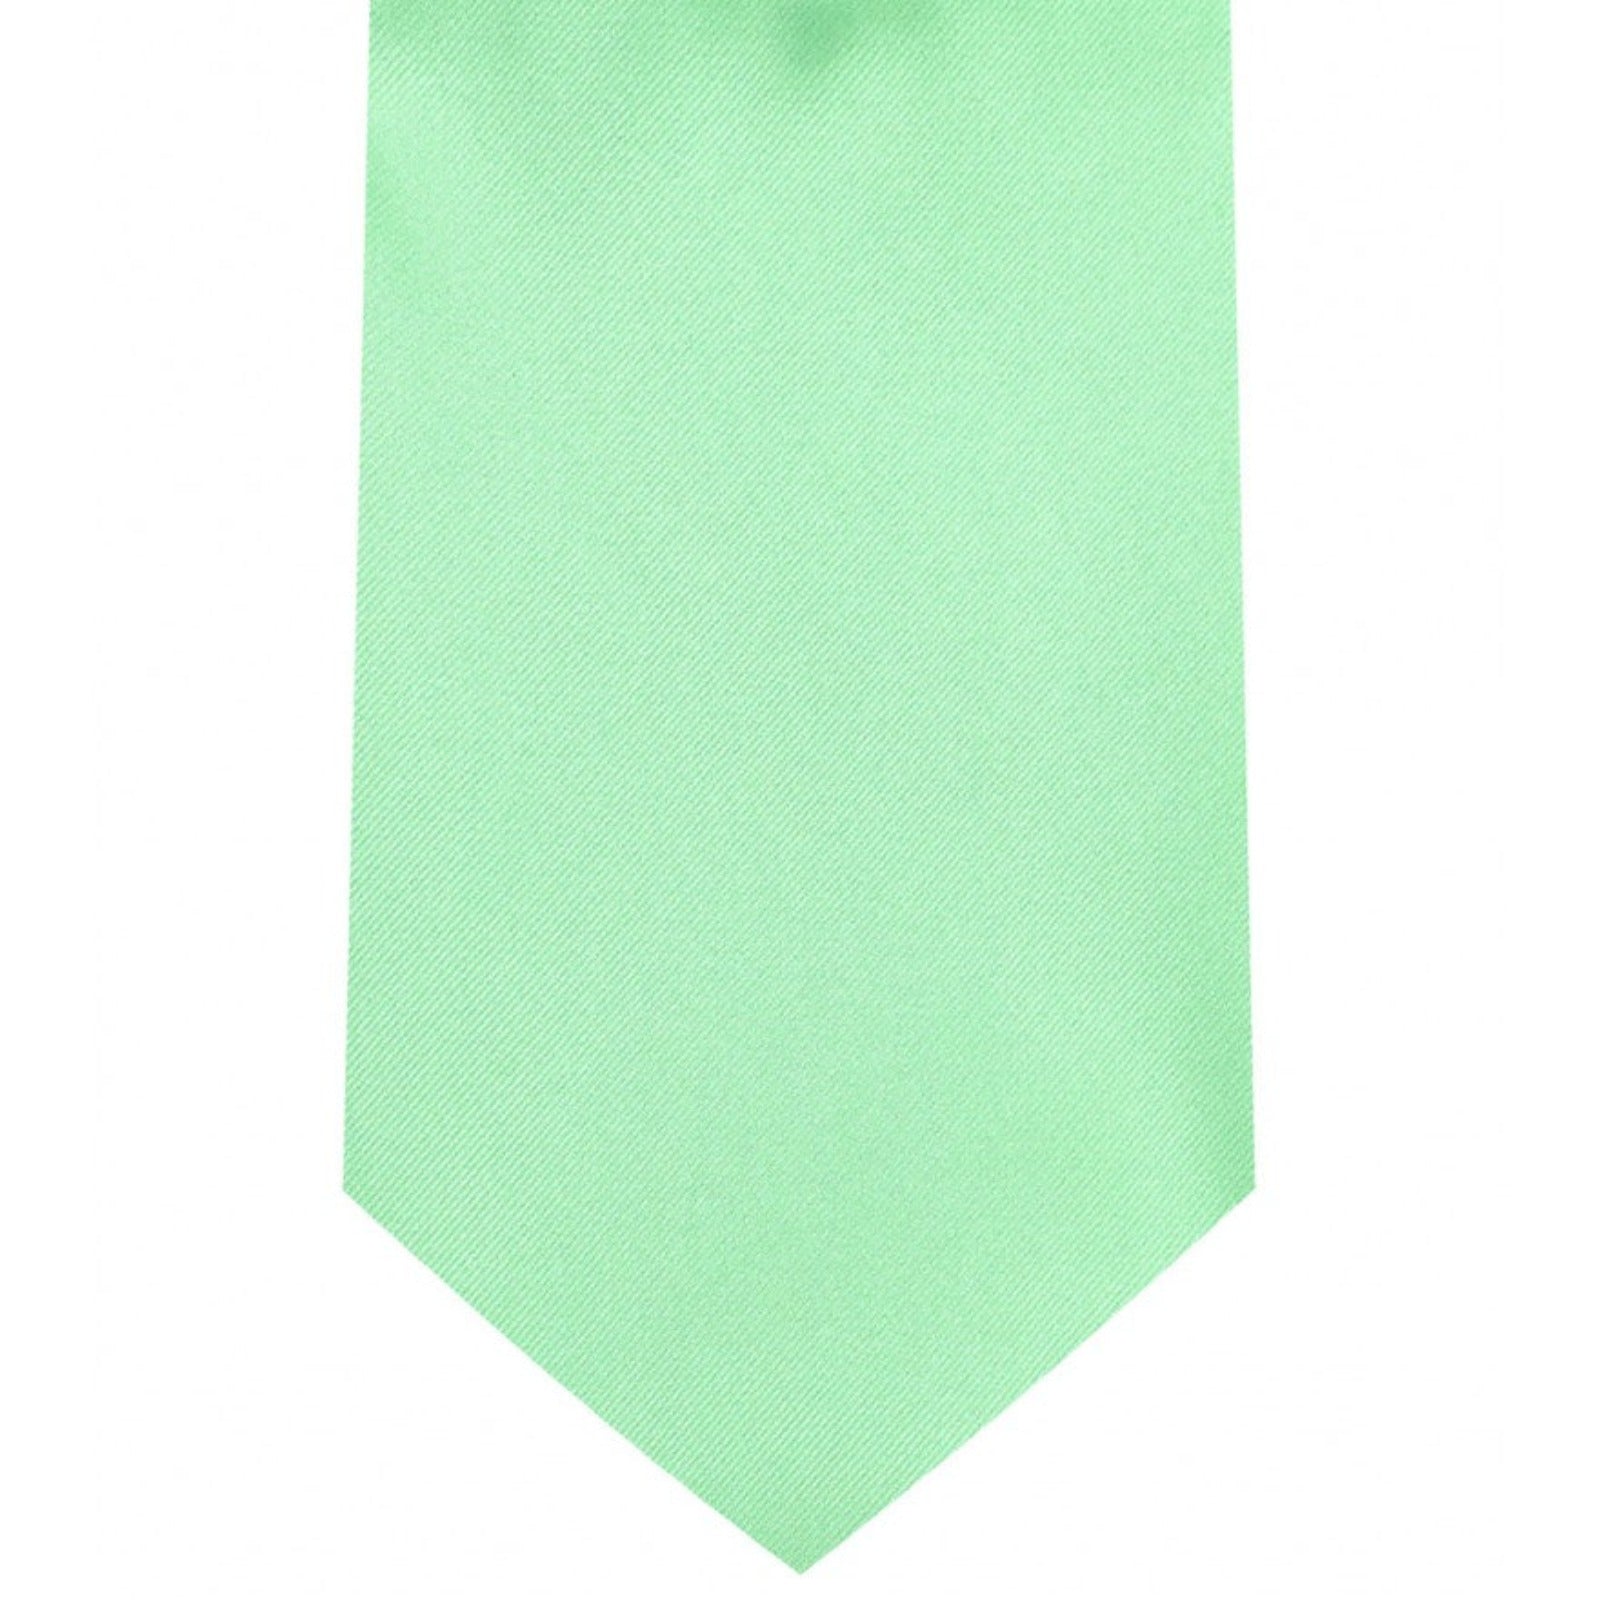 Classic Pastel Green Tie Regular width 3.5 inches With Matching Pocket Square | KCT Menswear